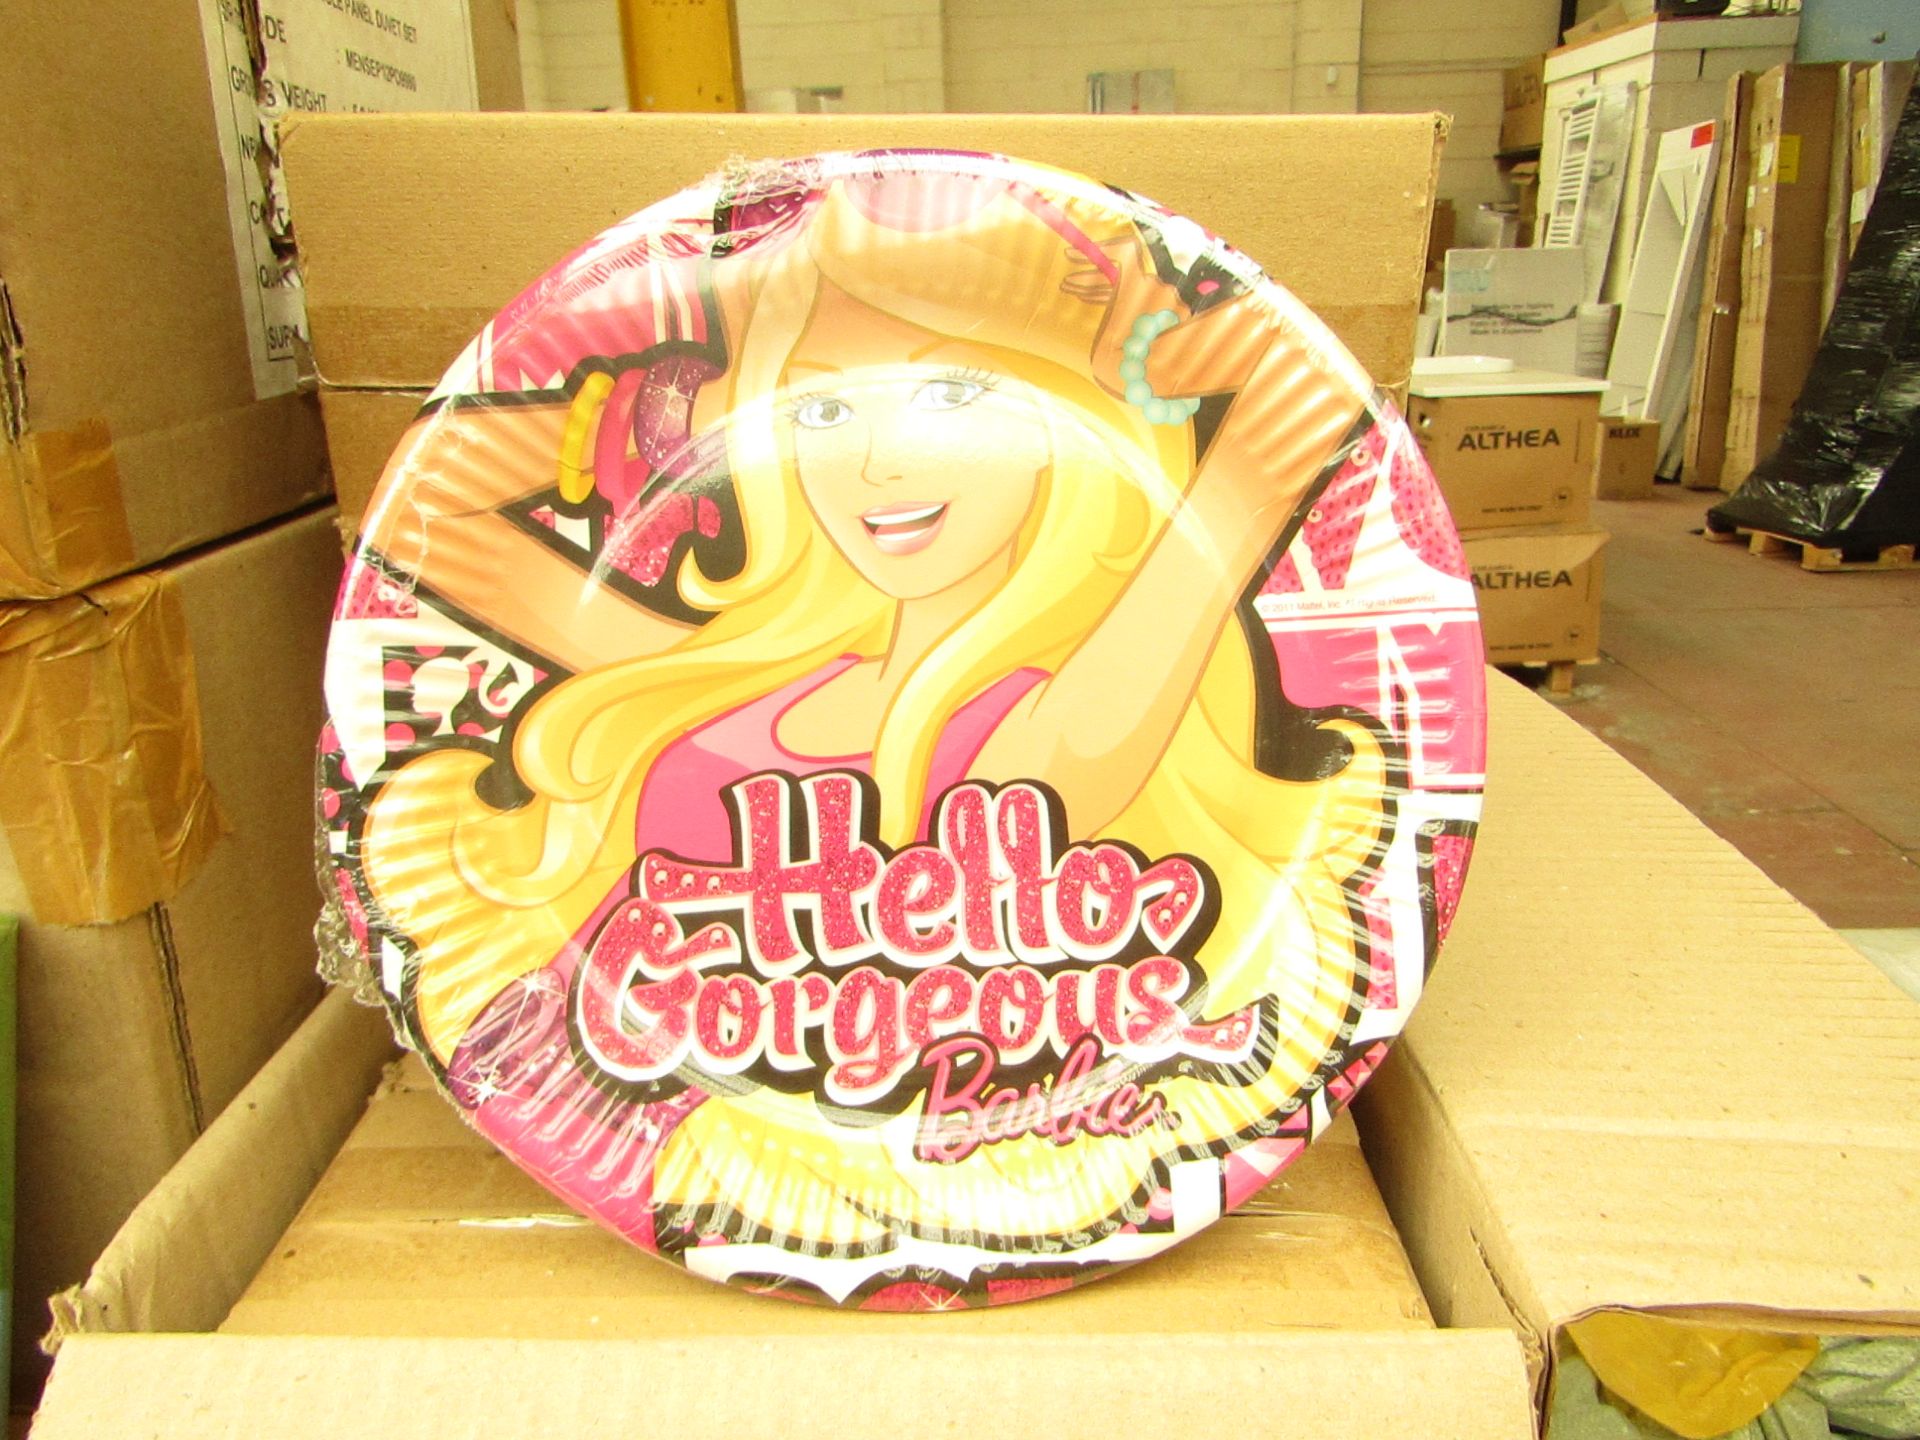 6x Packs of 6 Barbie paper plates, new and boxed.